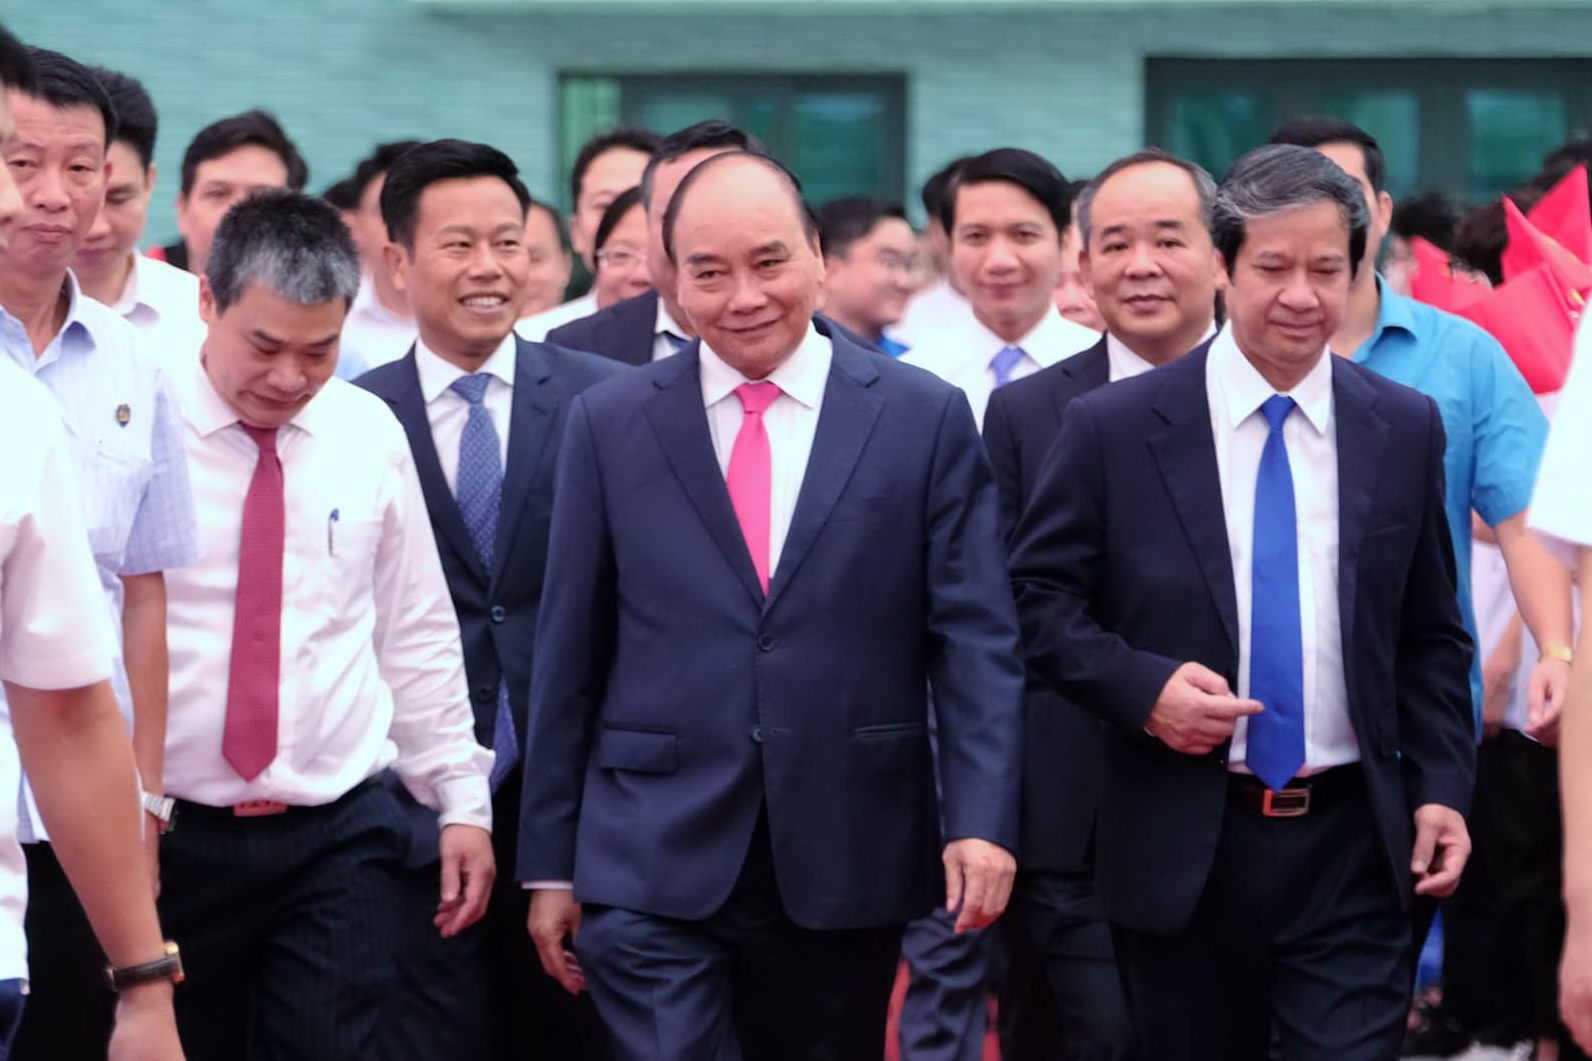 State President Nguyen Xuan Phuc (C) and Minister of Education and Training Nguyen Kim Son (R) arrive at the school opening ceremony at HUS High School for Gifted Students in Hanoi, September 5, 2022. Photo: Nam Tran / Tuoi Tre